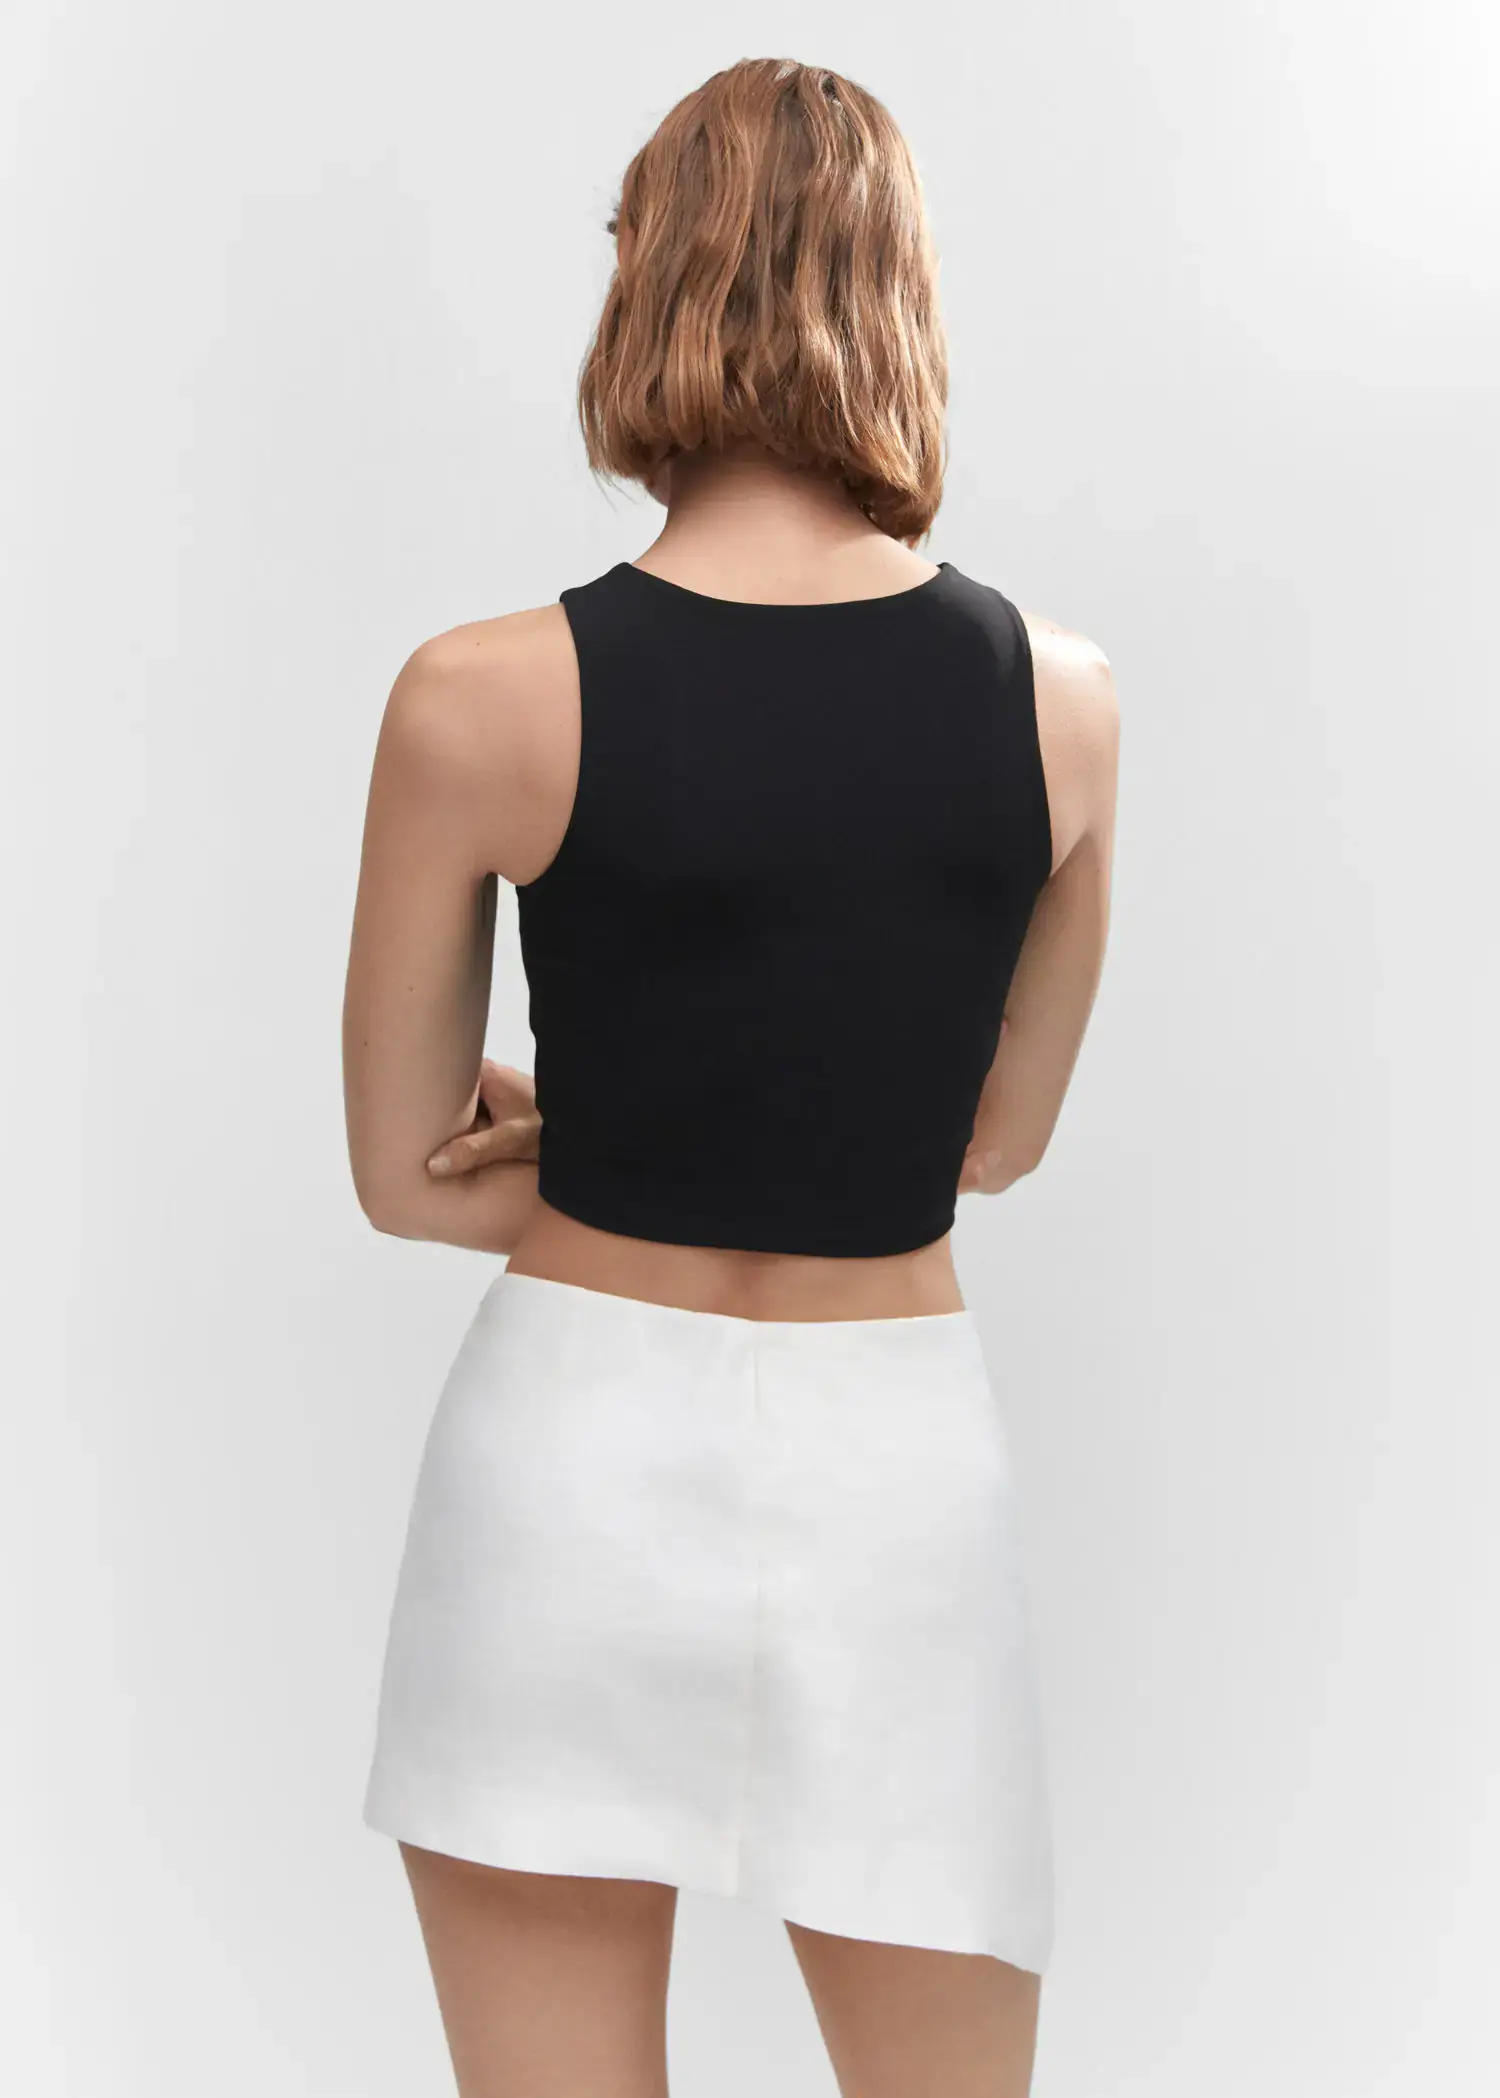 Mango Crop top halter neck. a woman wearing a black top and white skirt. 